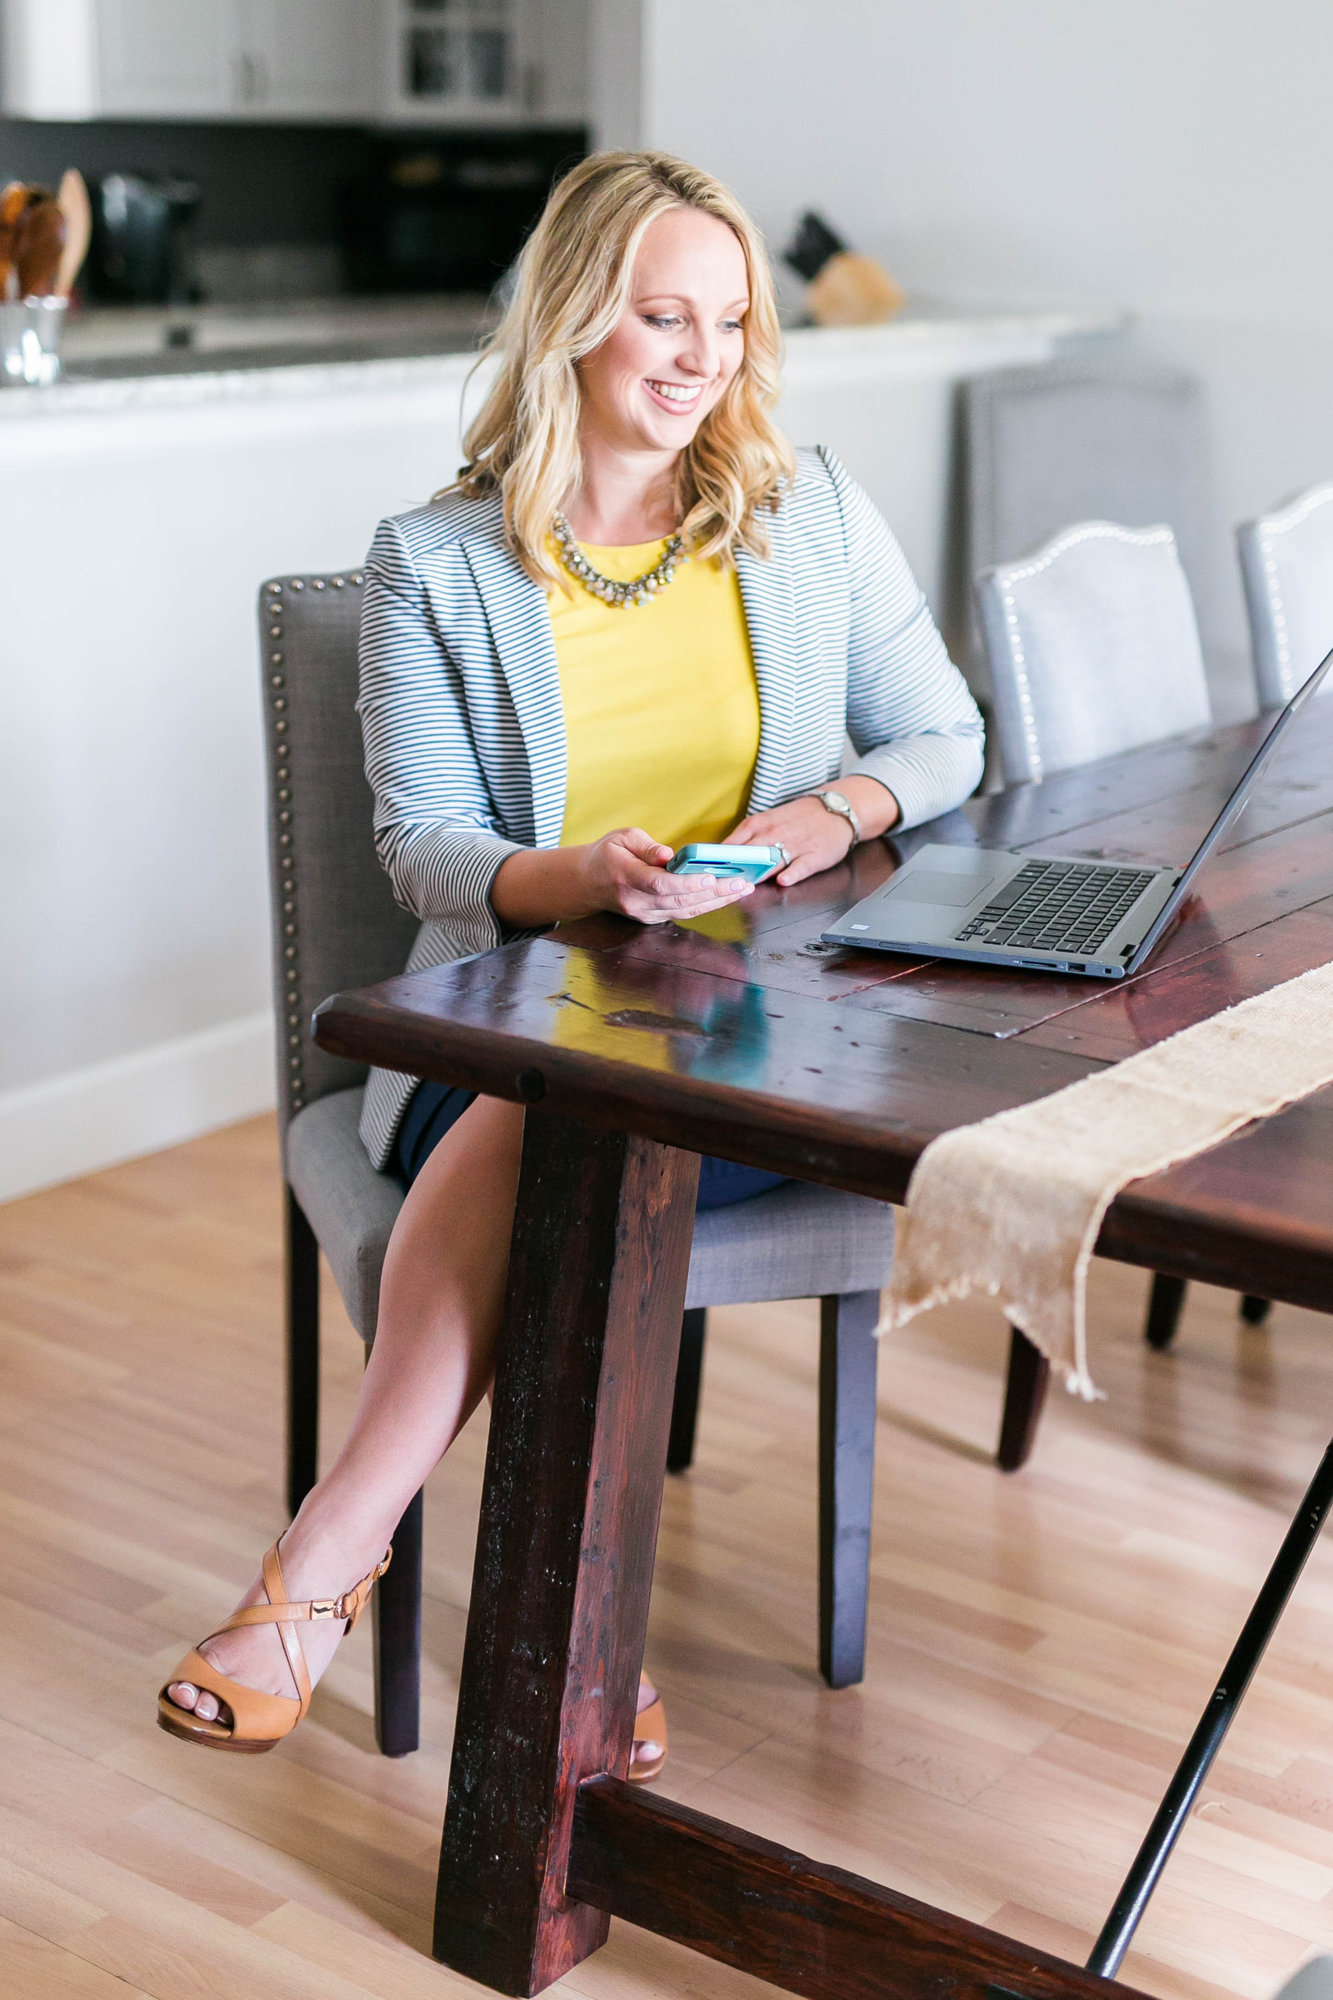 File. Tomlin St Cyr Real Estate Services co-owner Ali St Cyr was a 40 under 40 winner in 2020, which included work from home pictures.